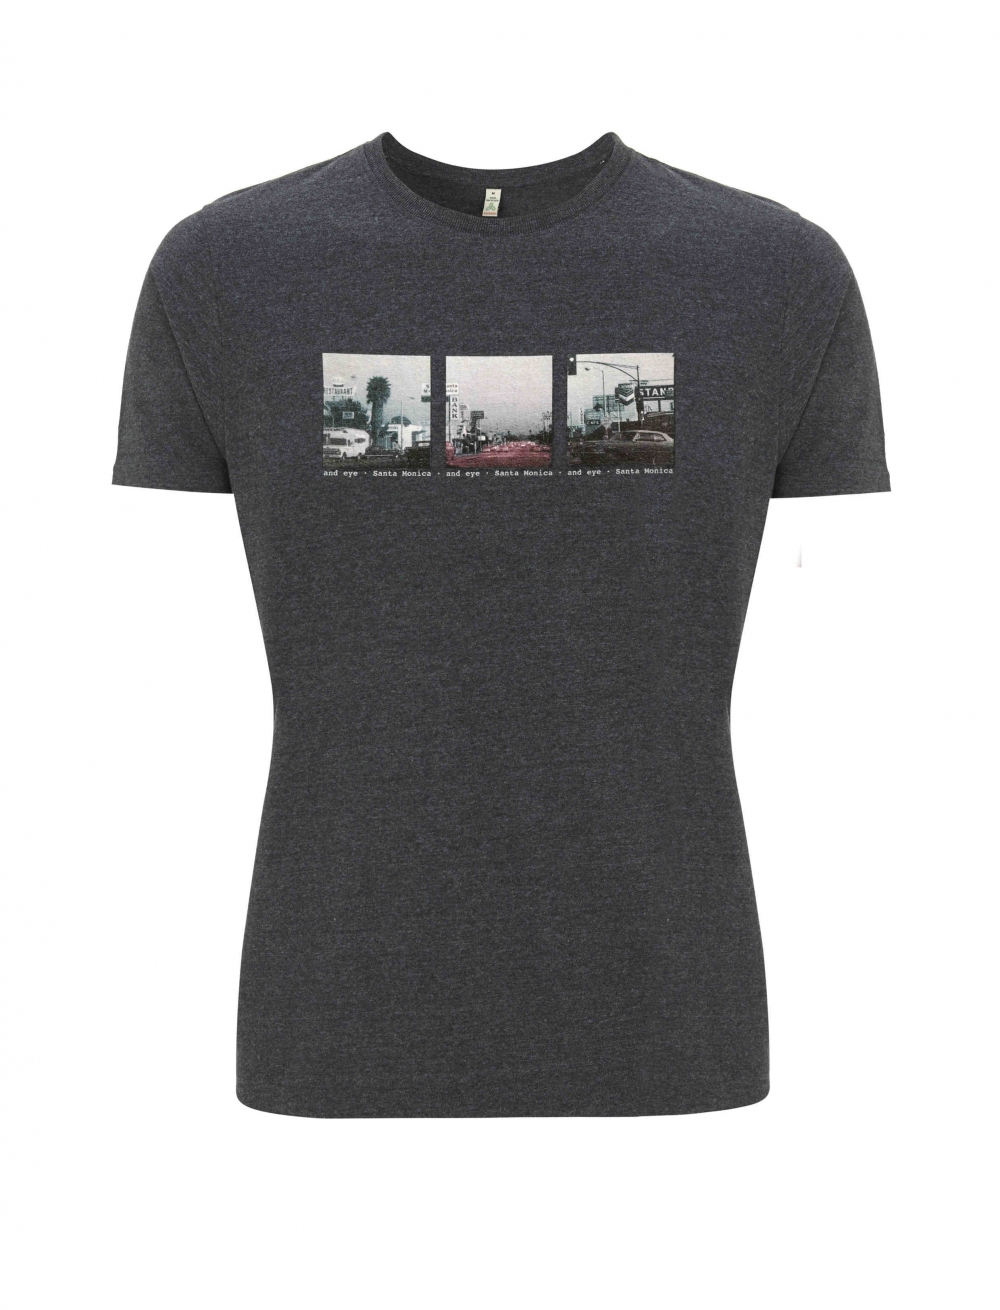 Recycled classic t-shirt with a vintage image of Santa Monica